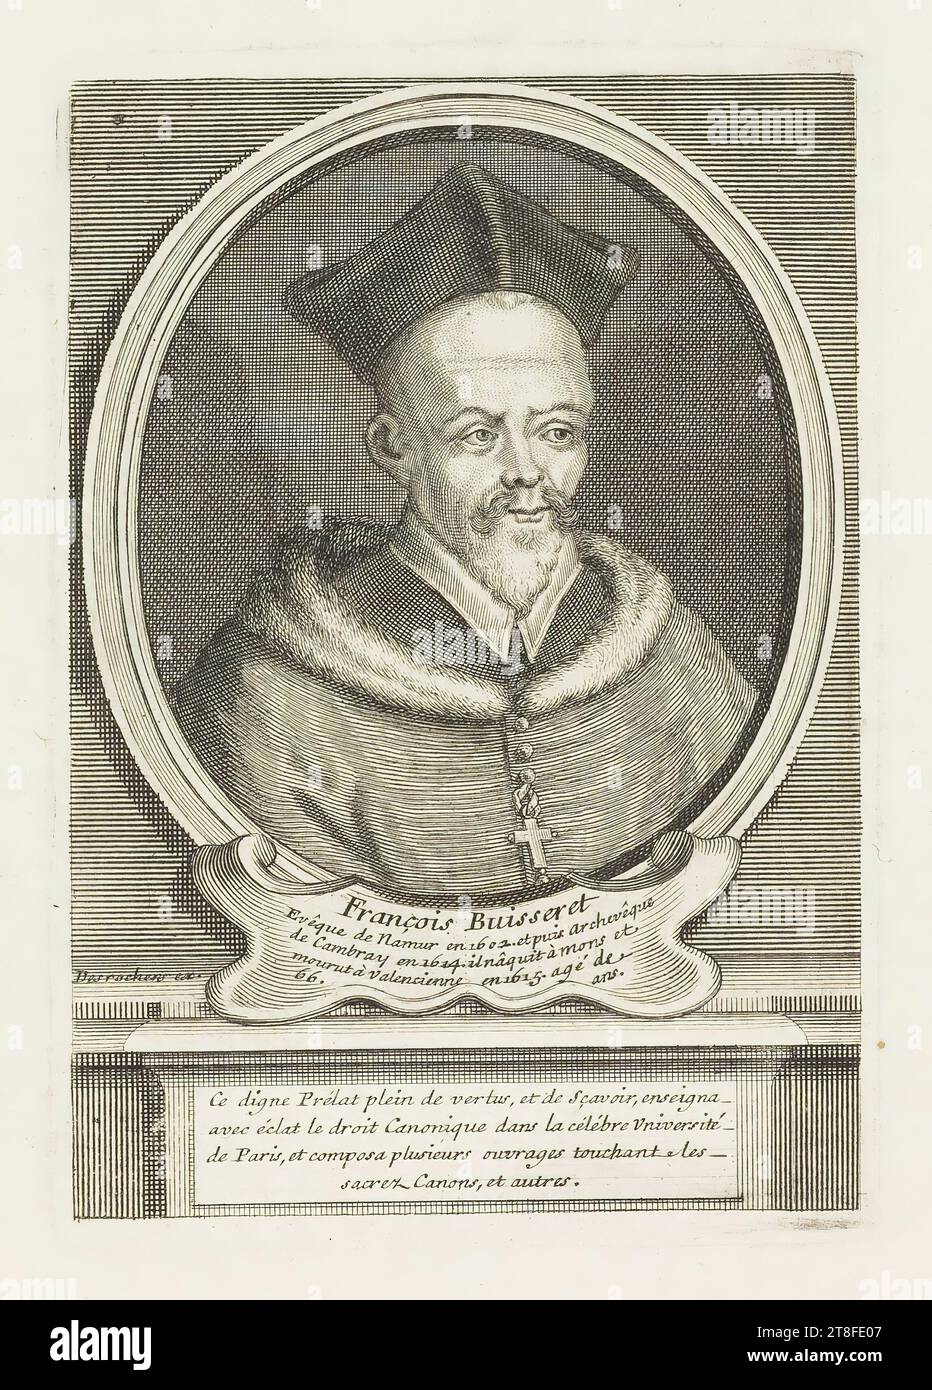 François Buisseret, Bishop of Namur in 1602. and then Archbishop of Cambray in 1624. He was born in Mons and died in Valencienne in 1615. Aged 66. Derochers ex. This worthy Prelate, full of virtues and knowledge, taught Canon Law with brilliance in the famous University of Paris, and composed several works touching the sacred Canons, and others Stock Photo